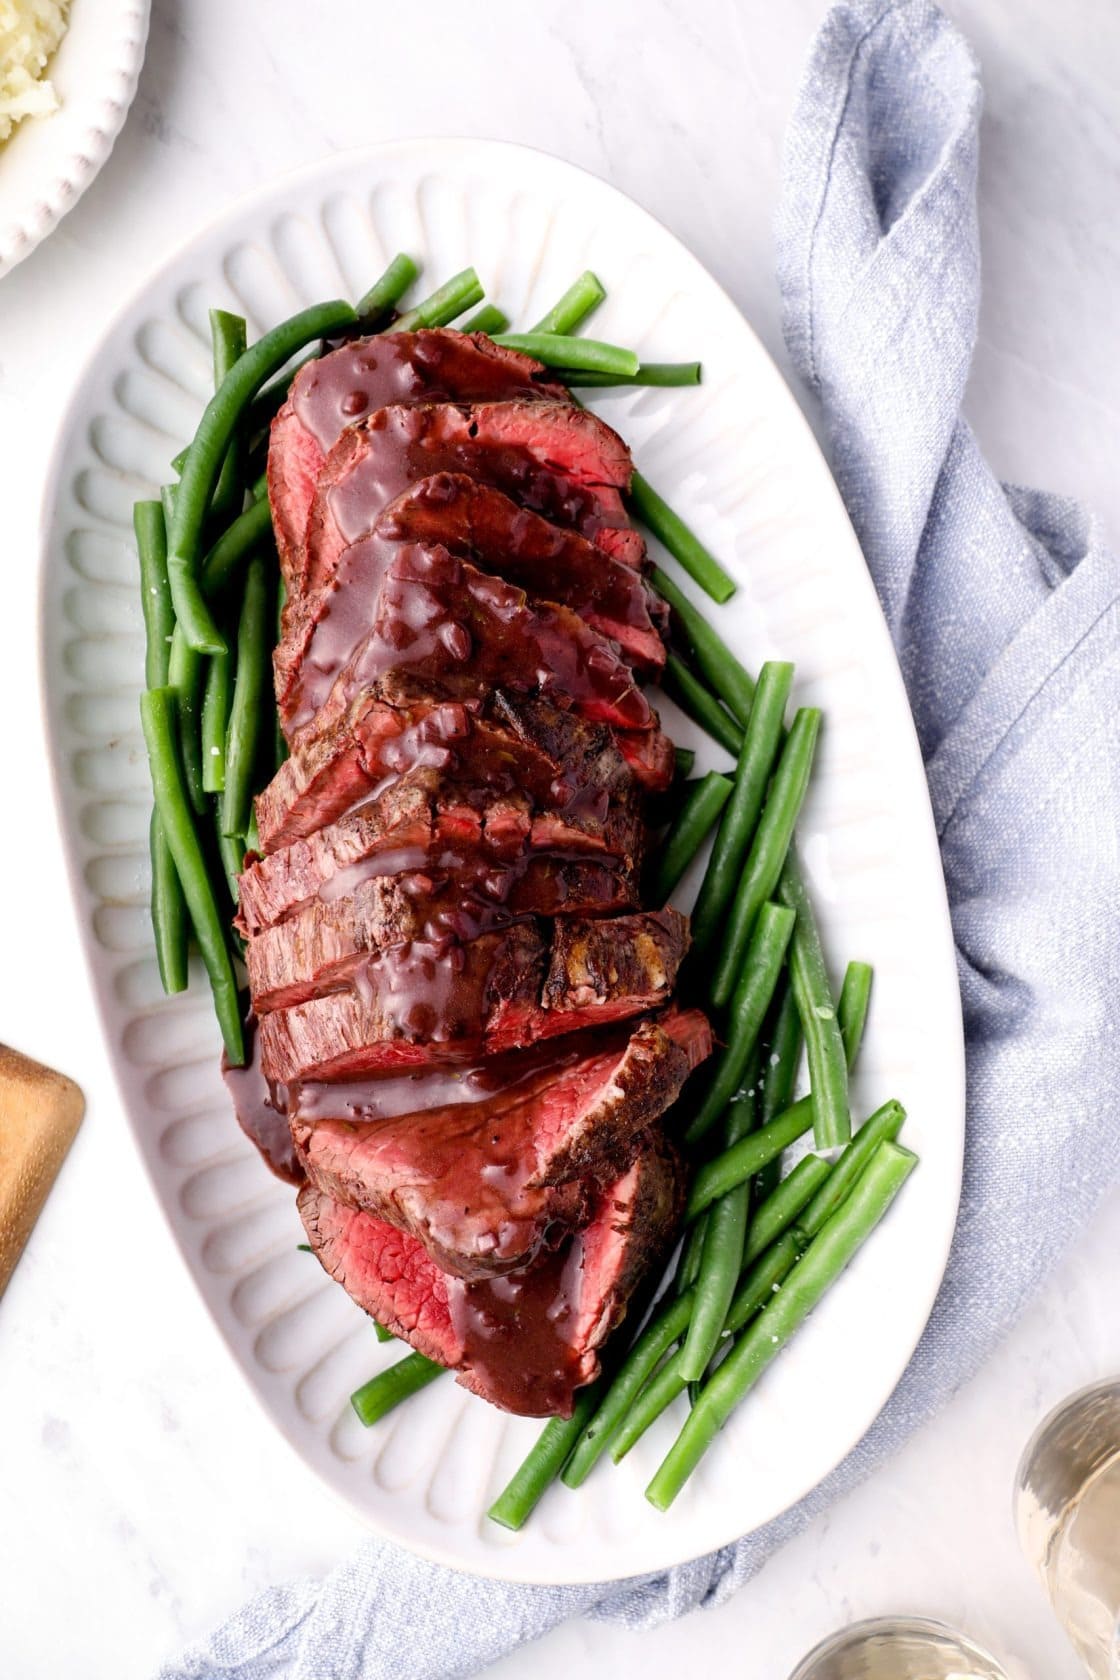 Sliced beef tenderloin drizzled with red wine sauce with green beans on side.